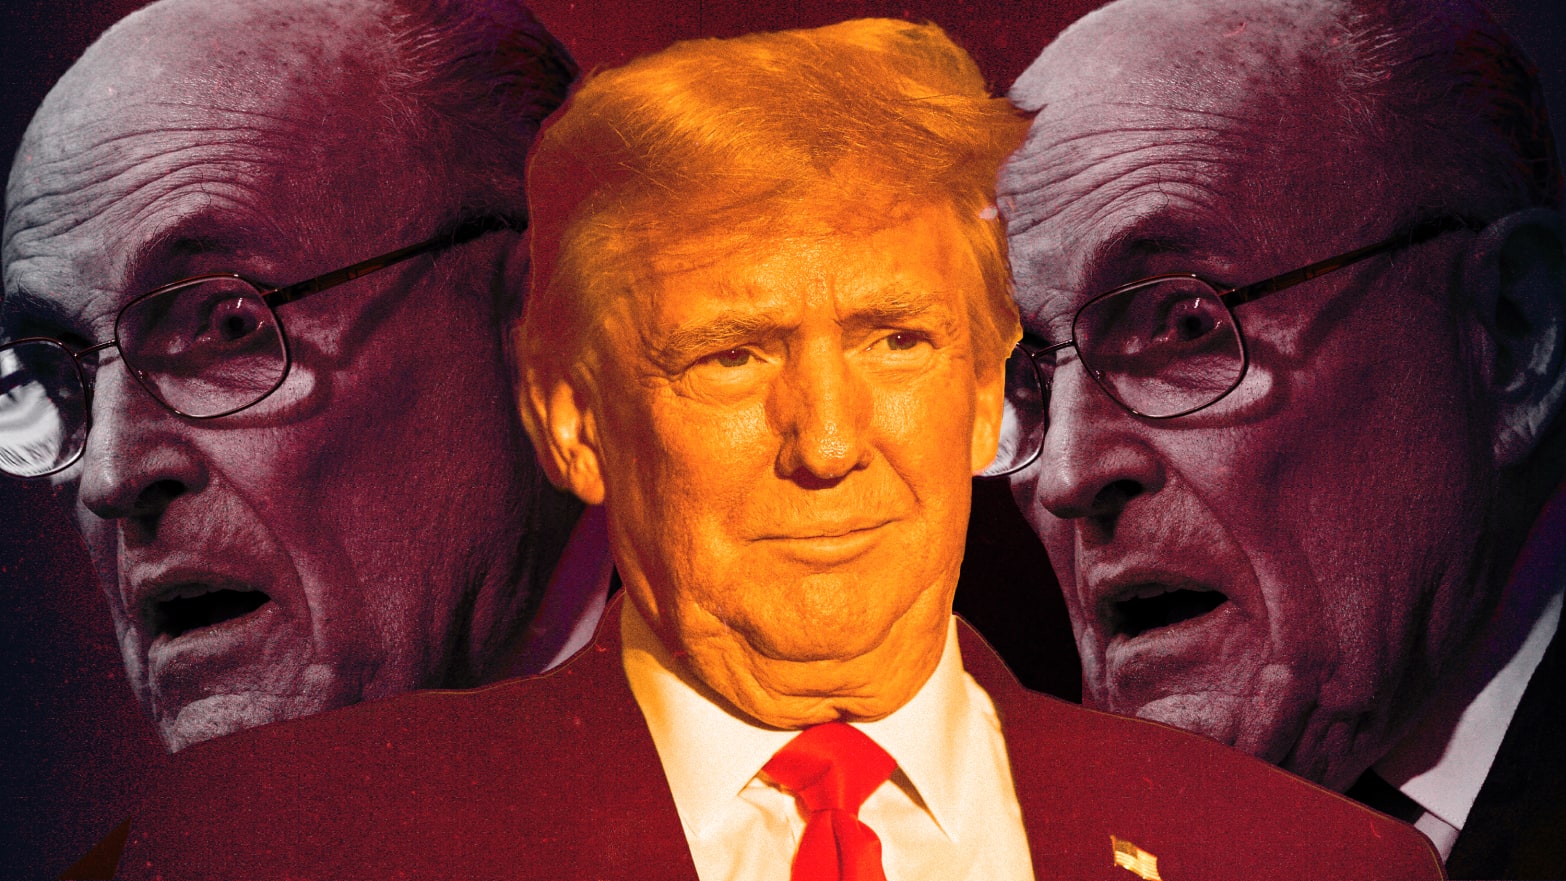 A photo illustration of former President Donald Trump and Rudy Giuliani.